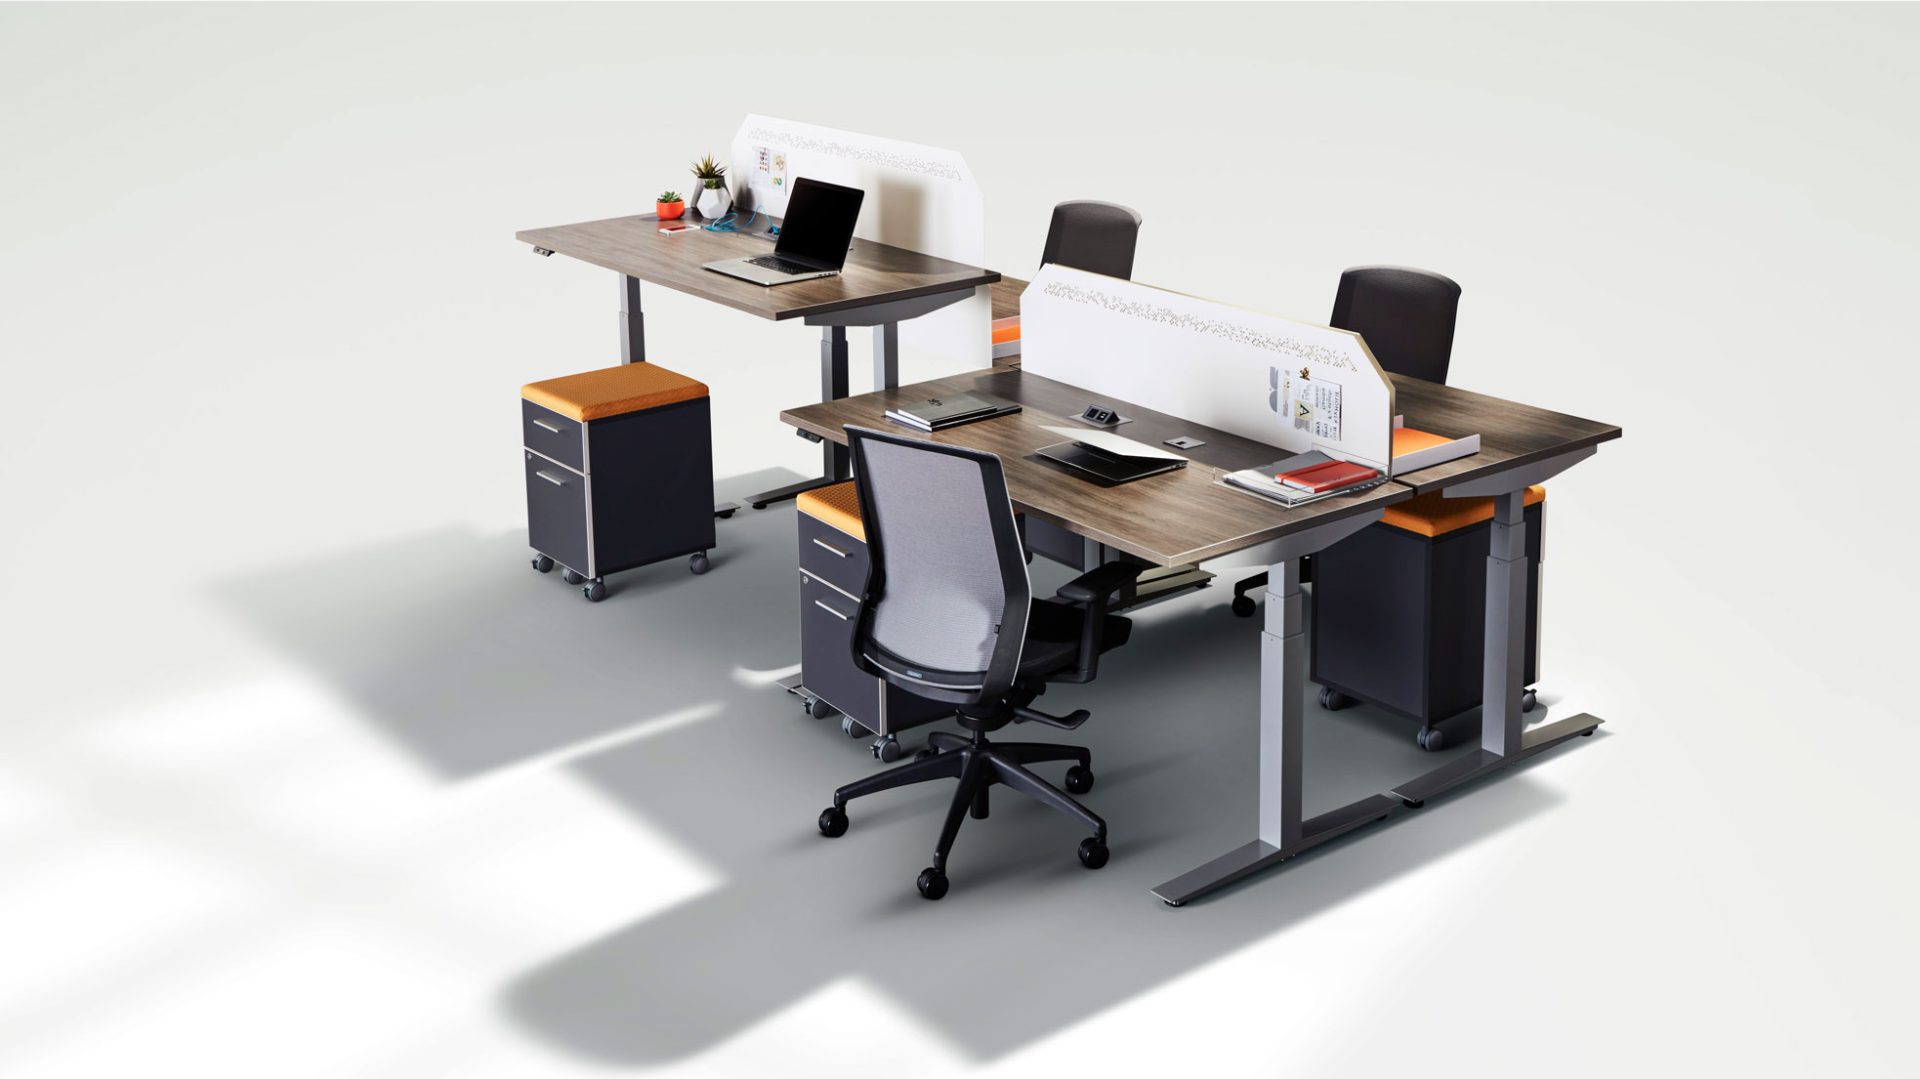 <h1>The Importance of Ergonomics in The Workplace</h1>